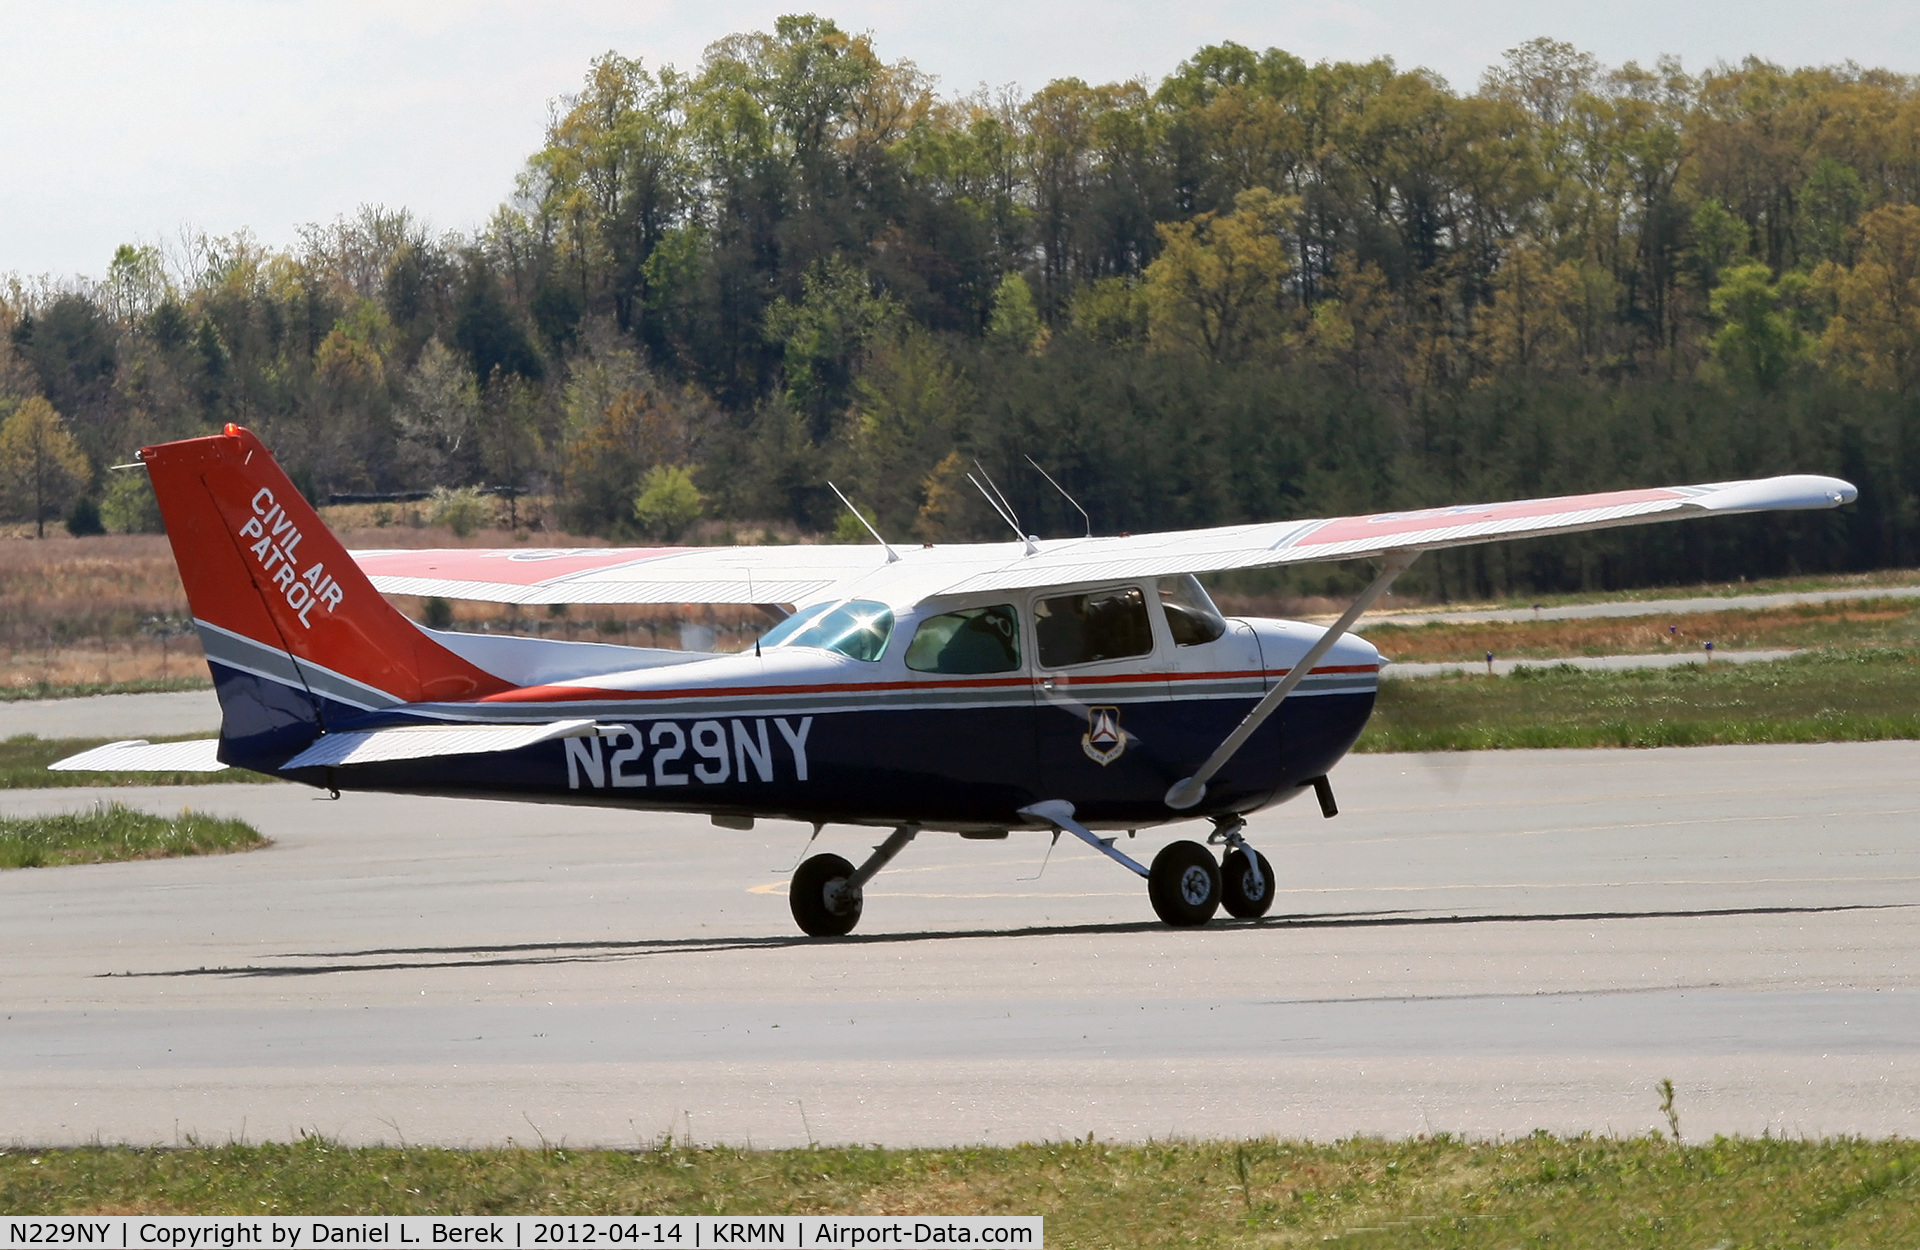 N229NY, 1978 Cessna 172N C/N 17271323, Resplendent in her CAP uniform, this Skyhawk is returning home to Maxwell AFB in Alabama.